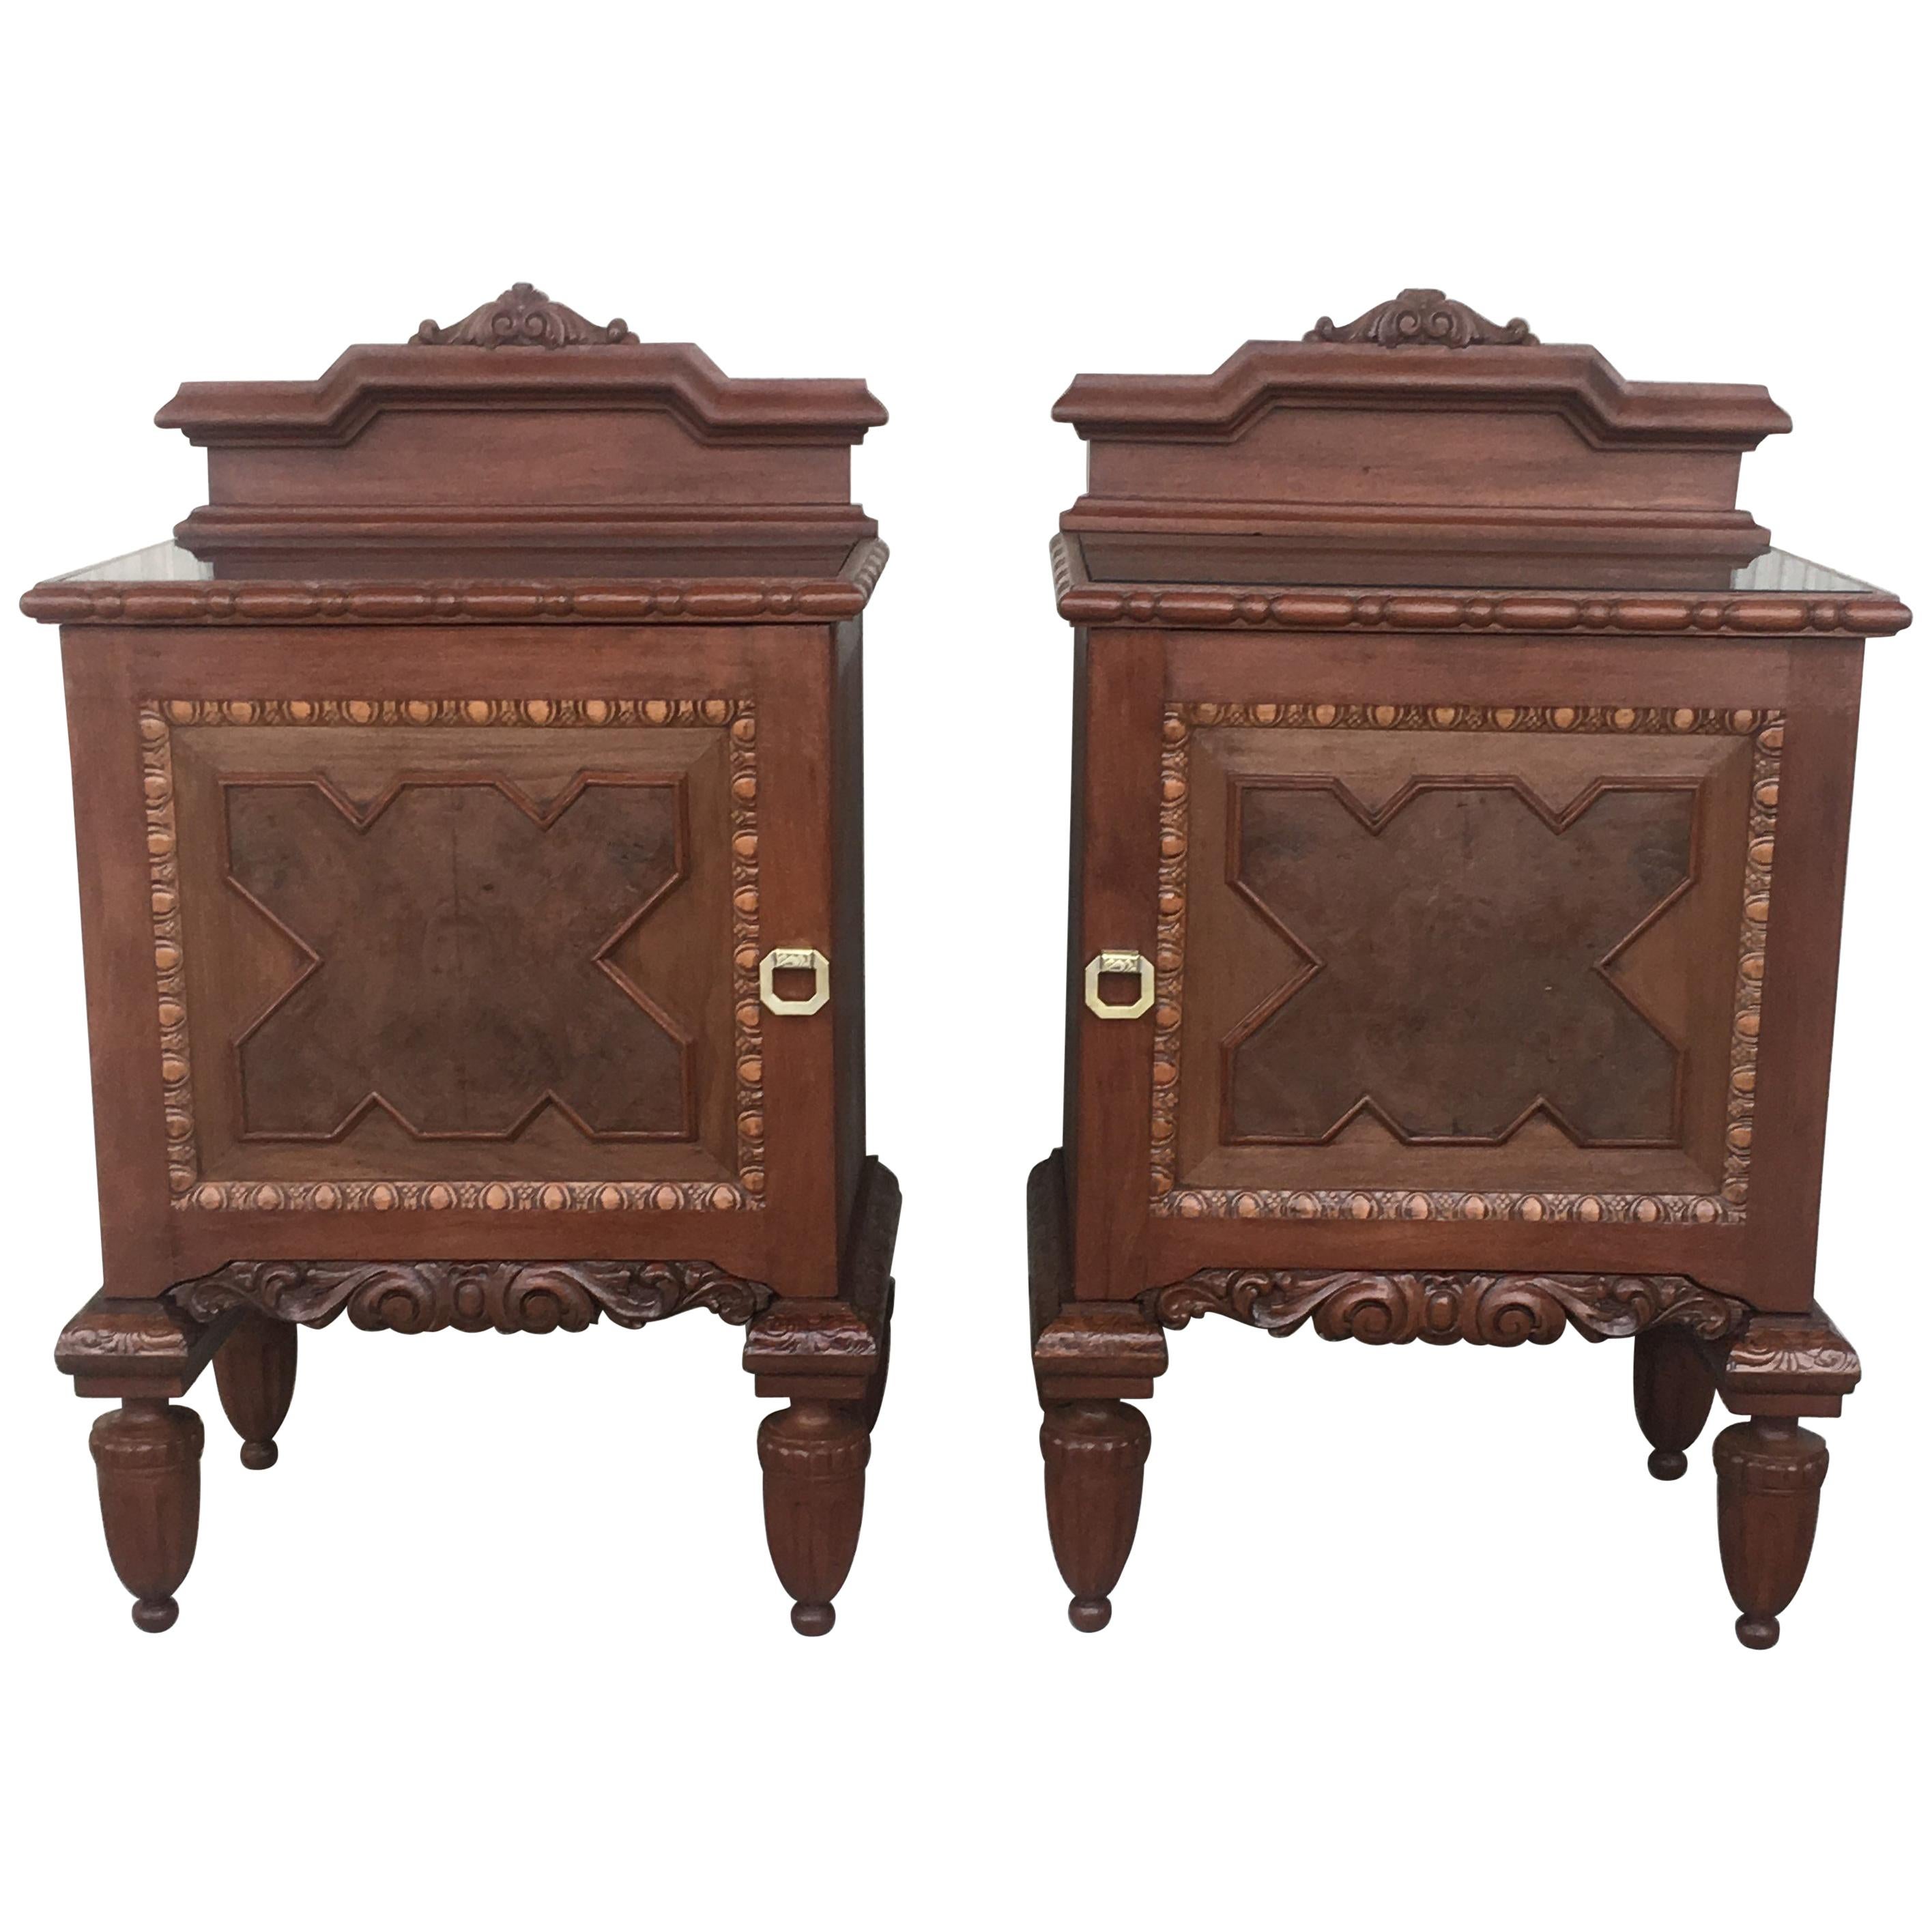 Pair of French Art Deco heavily hand carved bedside tables nightstands, 1920s.

French nightstands with some of the finest hand carved details with black glass in the tops.